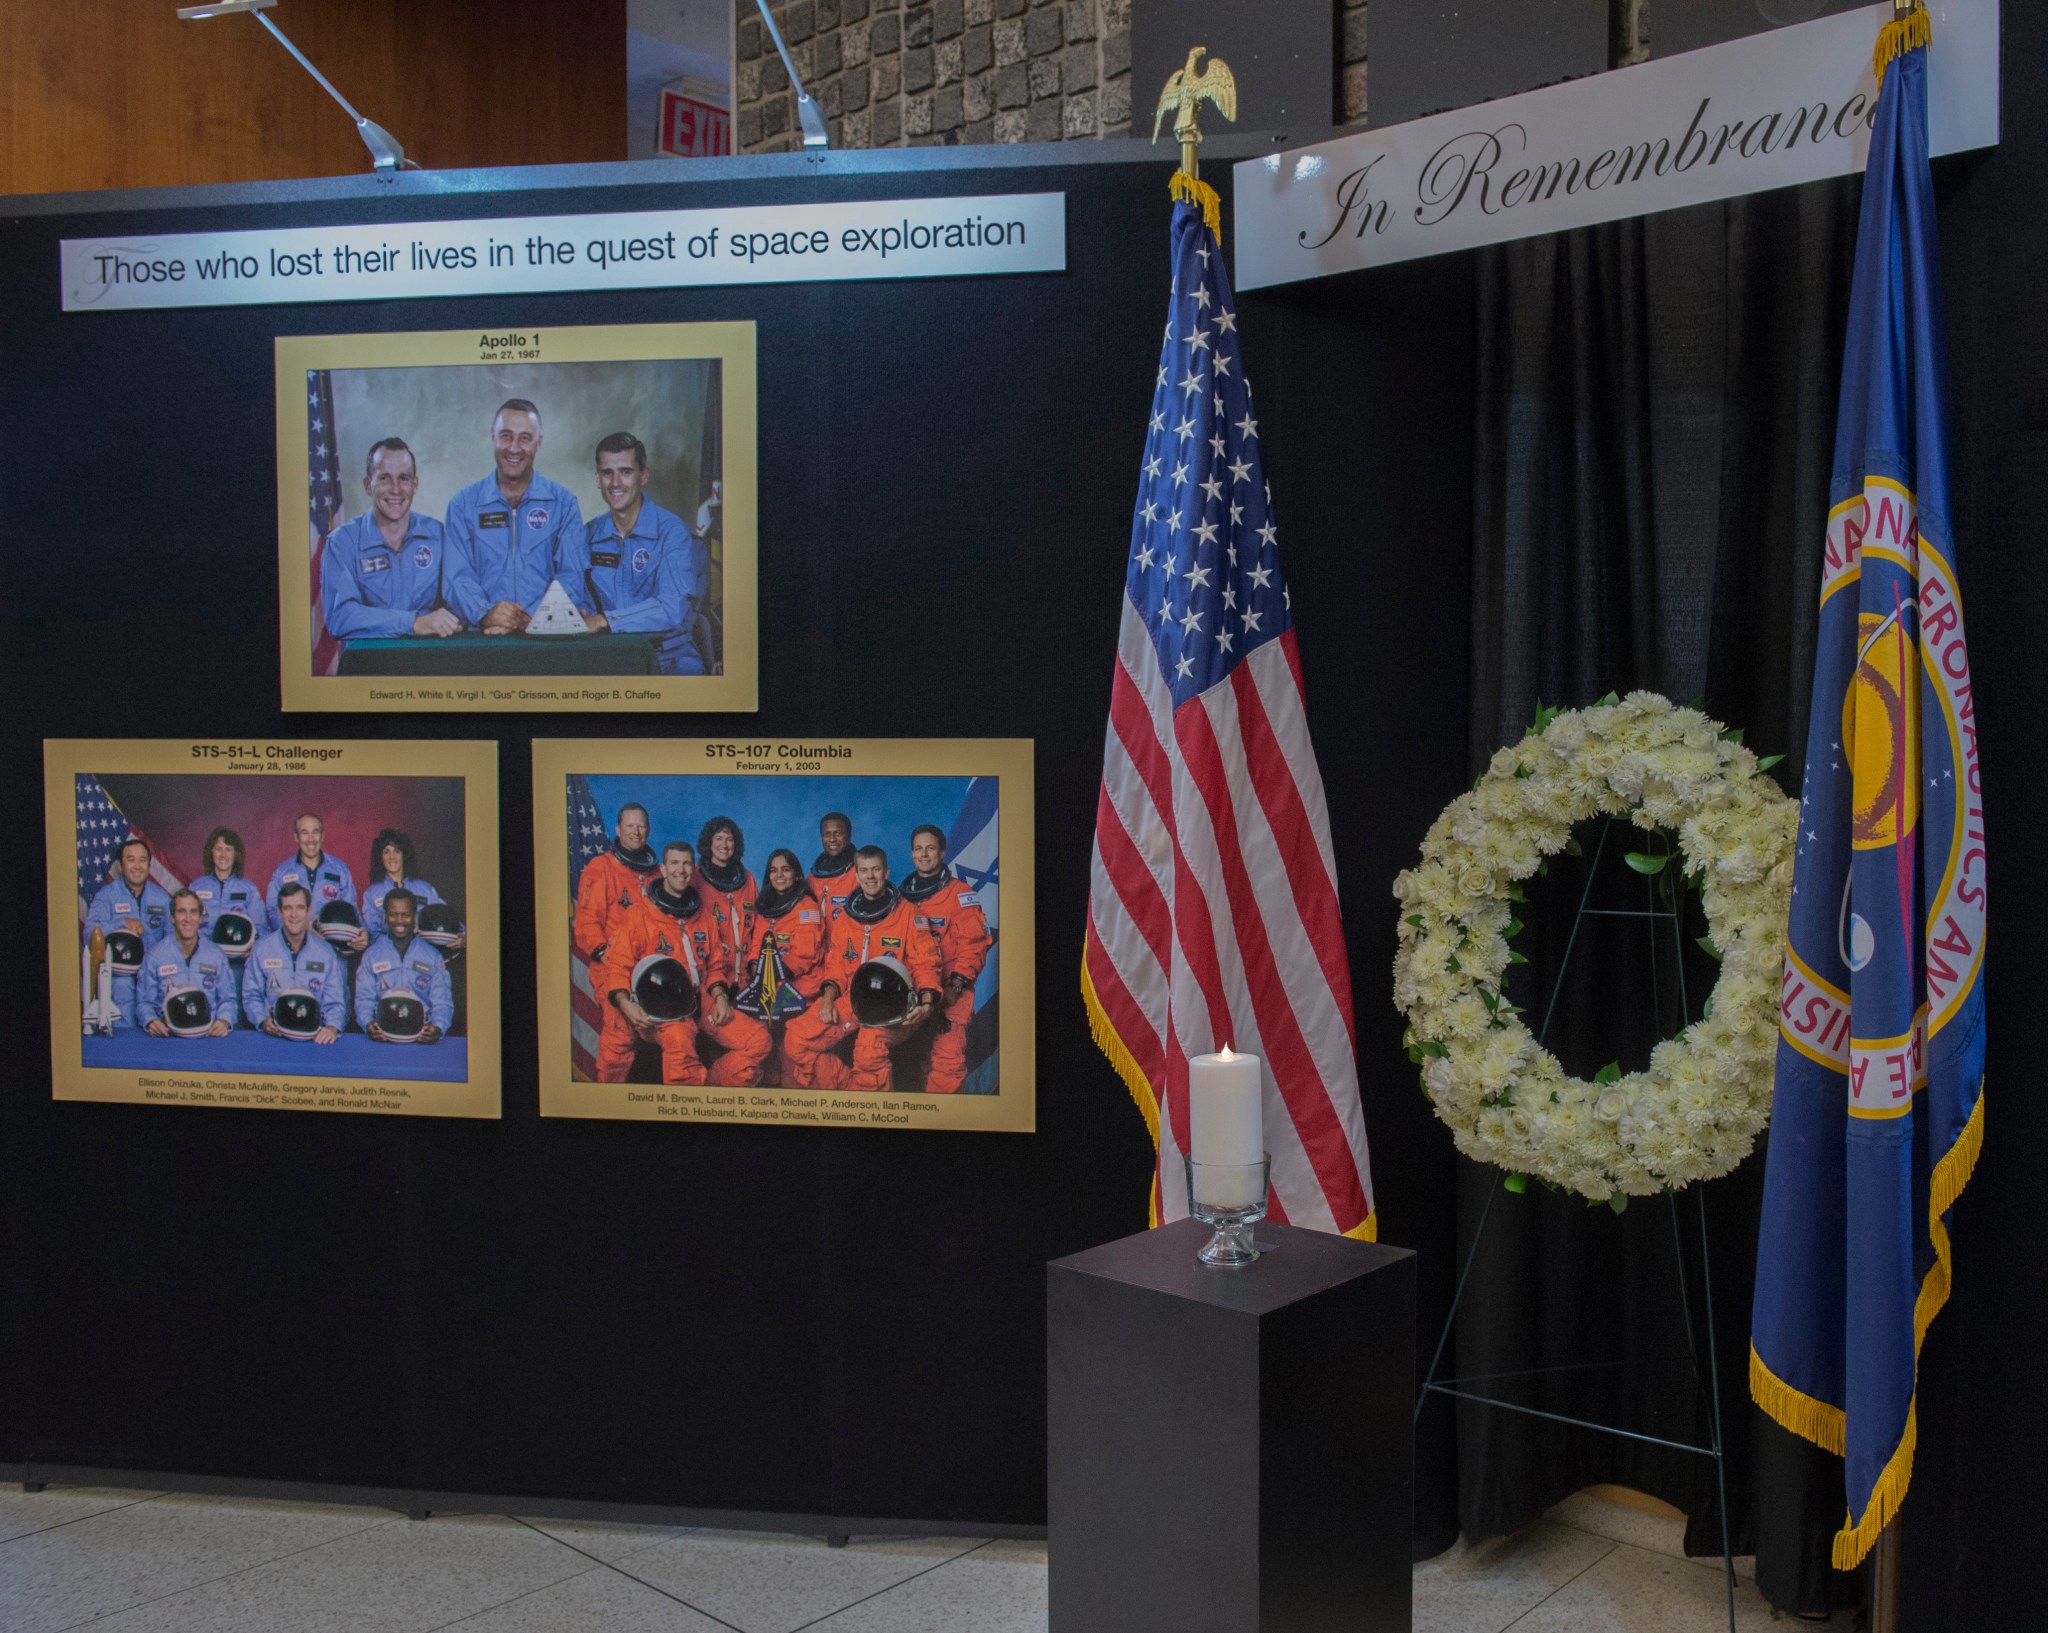 On Feb. 7, the NASA's Marshall Space Flight Center will honor members of the NASA family who lost their lives.